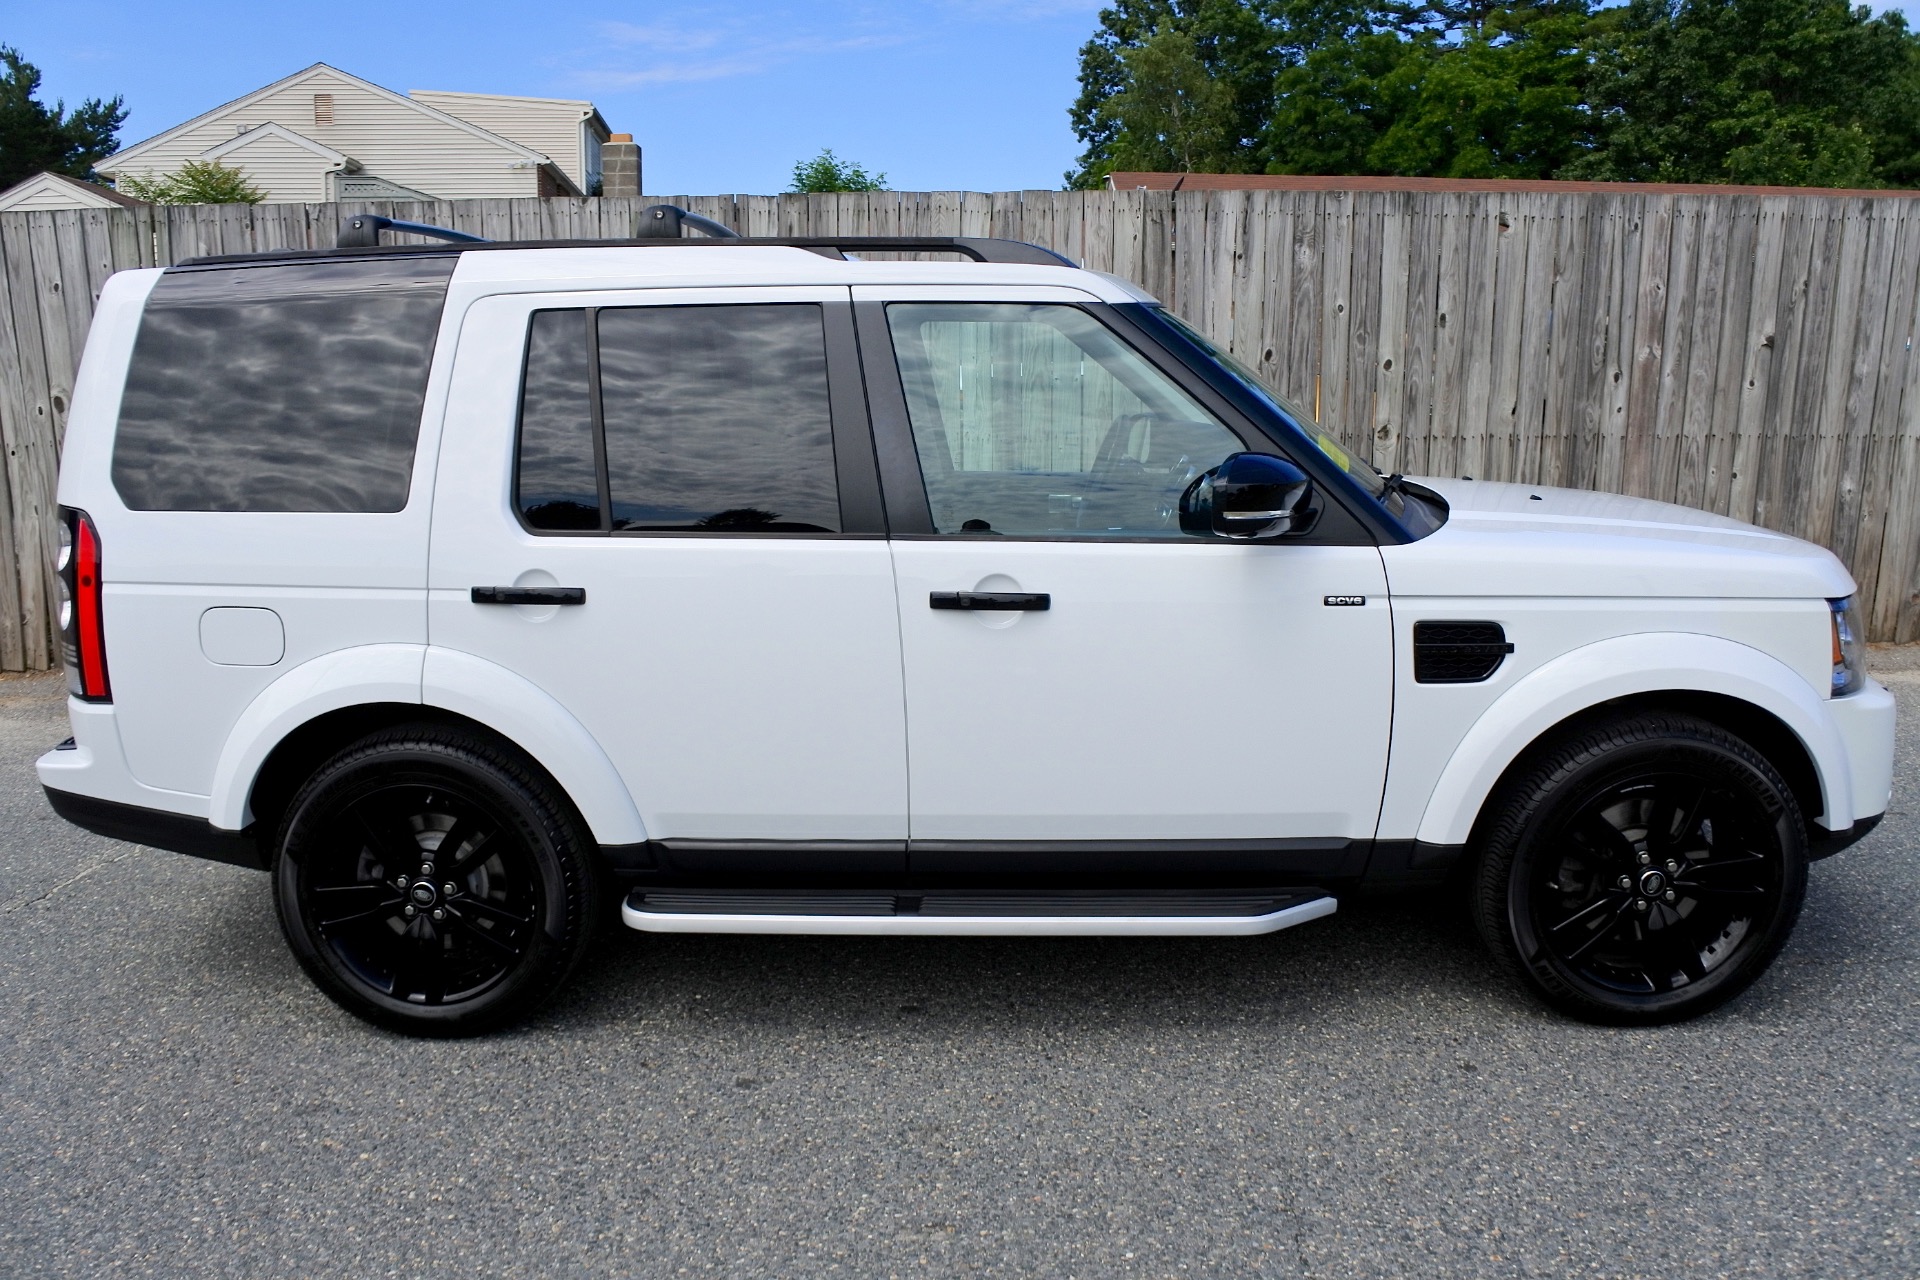 Used 2014 Land Rover Lr4 Hse Lux For Sale 27800 Metro West Motorcars Llc Stock 730909